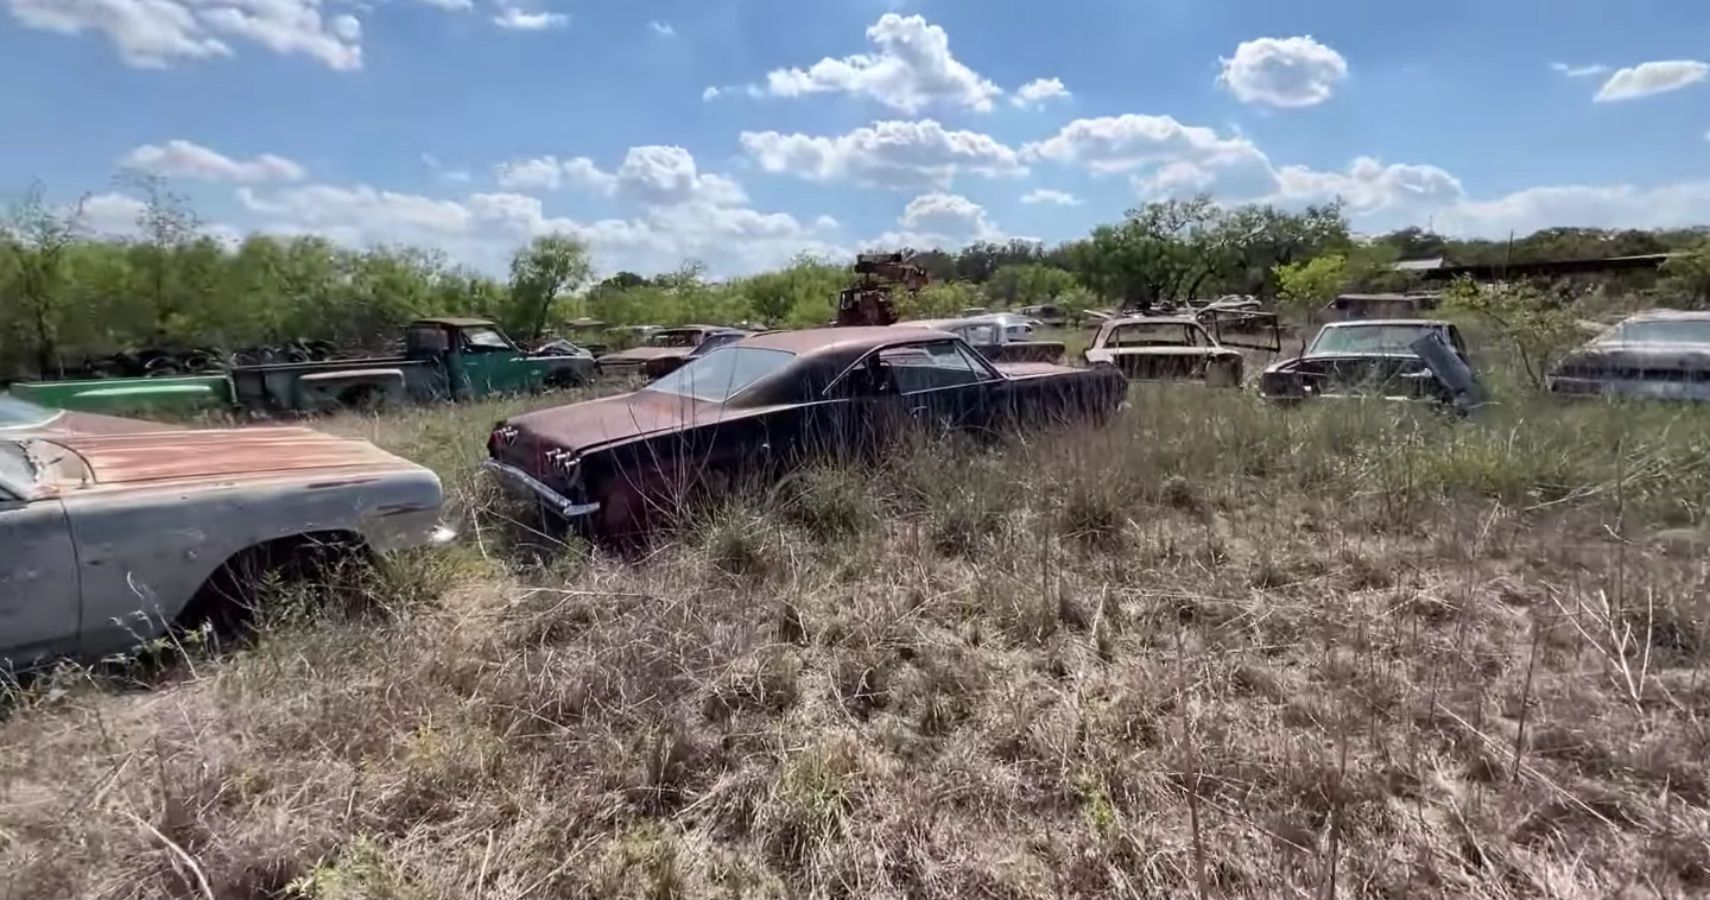 See The Classic Car Graveyard In Texas Filled With Mopar And GM Icons